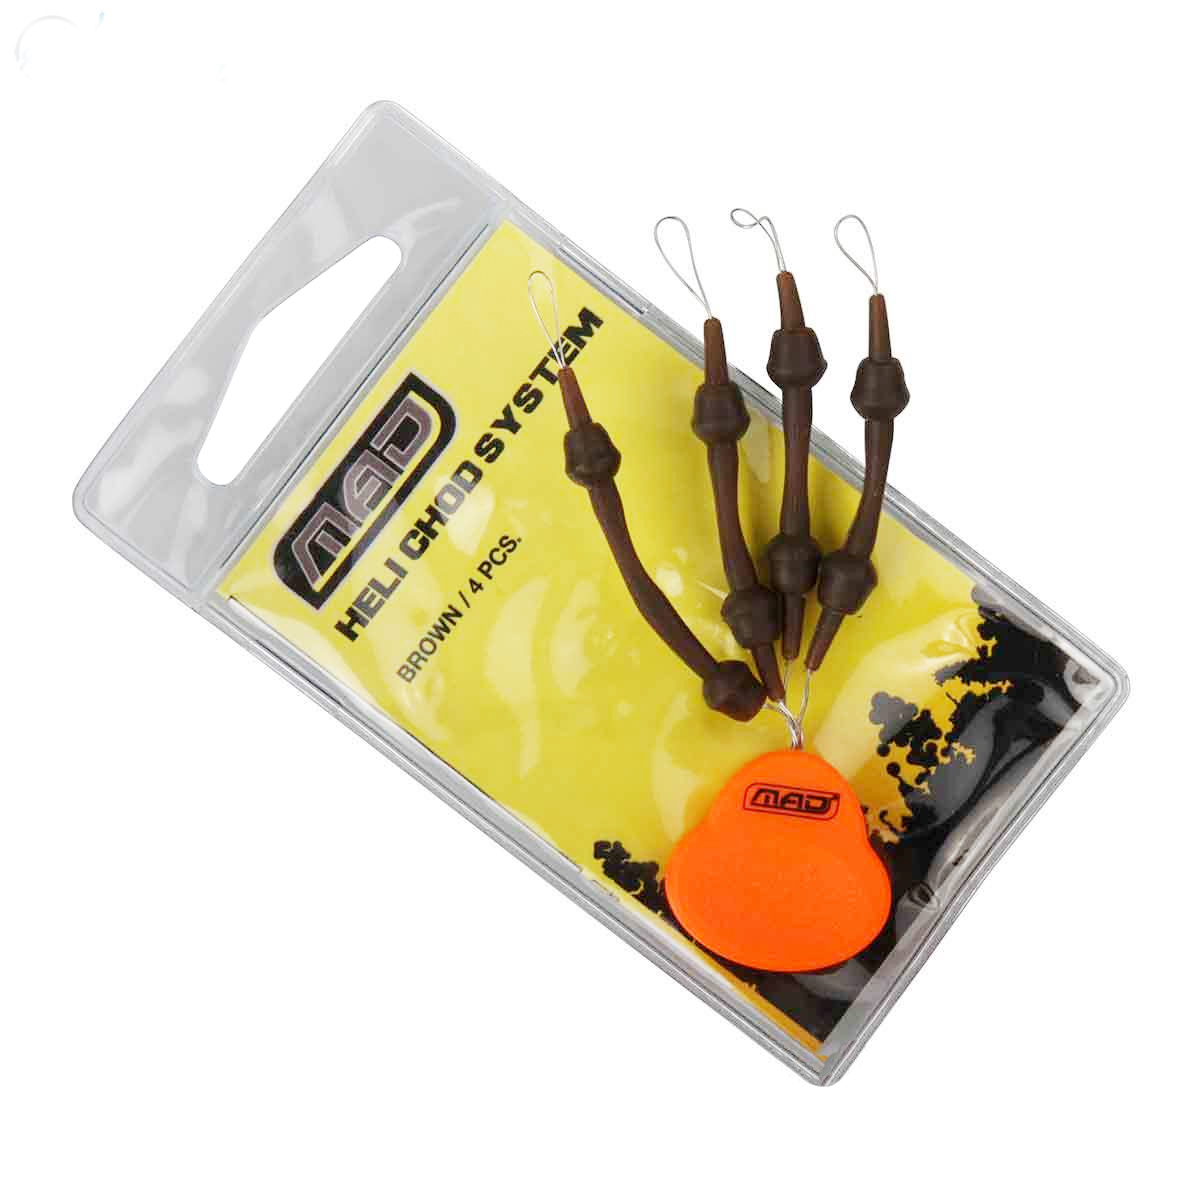 Carp Tacklebox, packed with top products for carp fishing! - Mad Heli Chod System